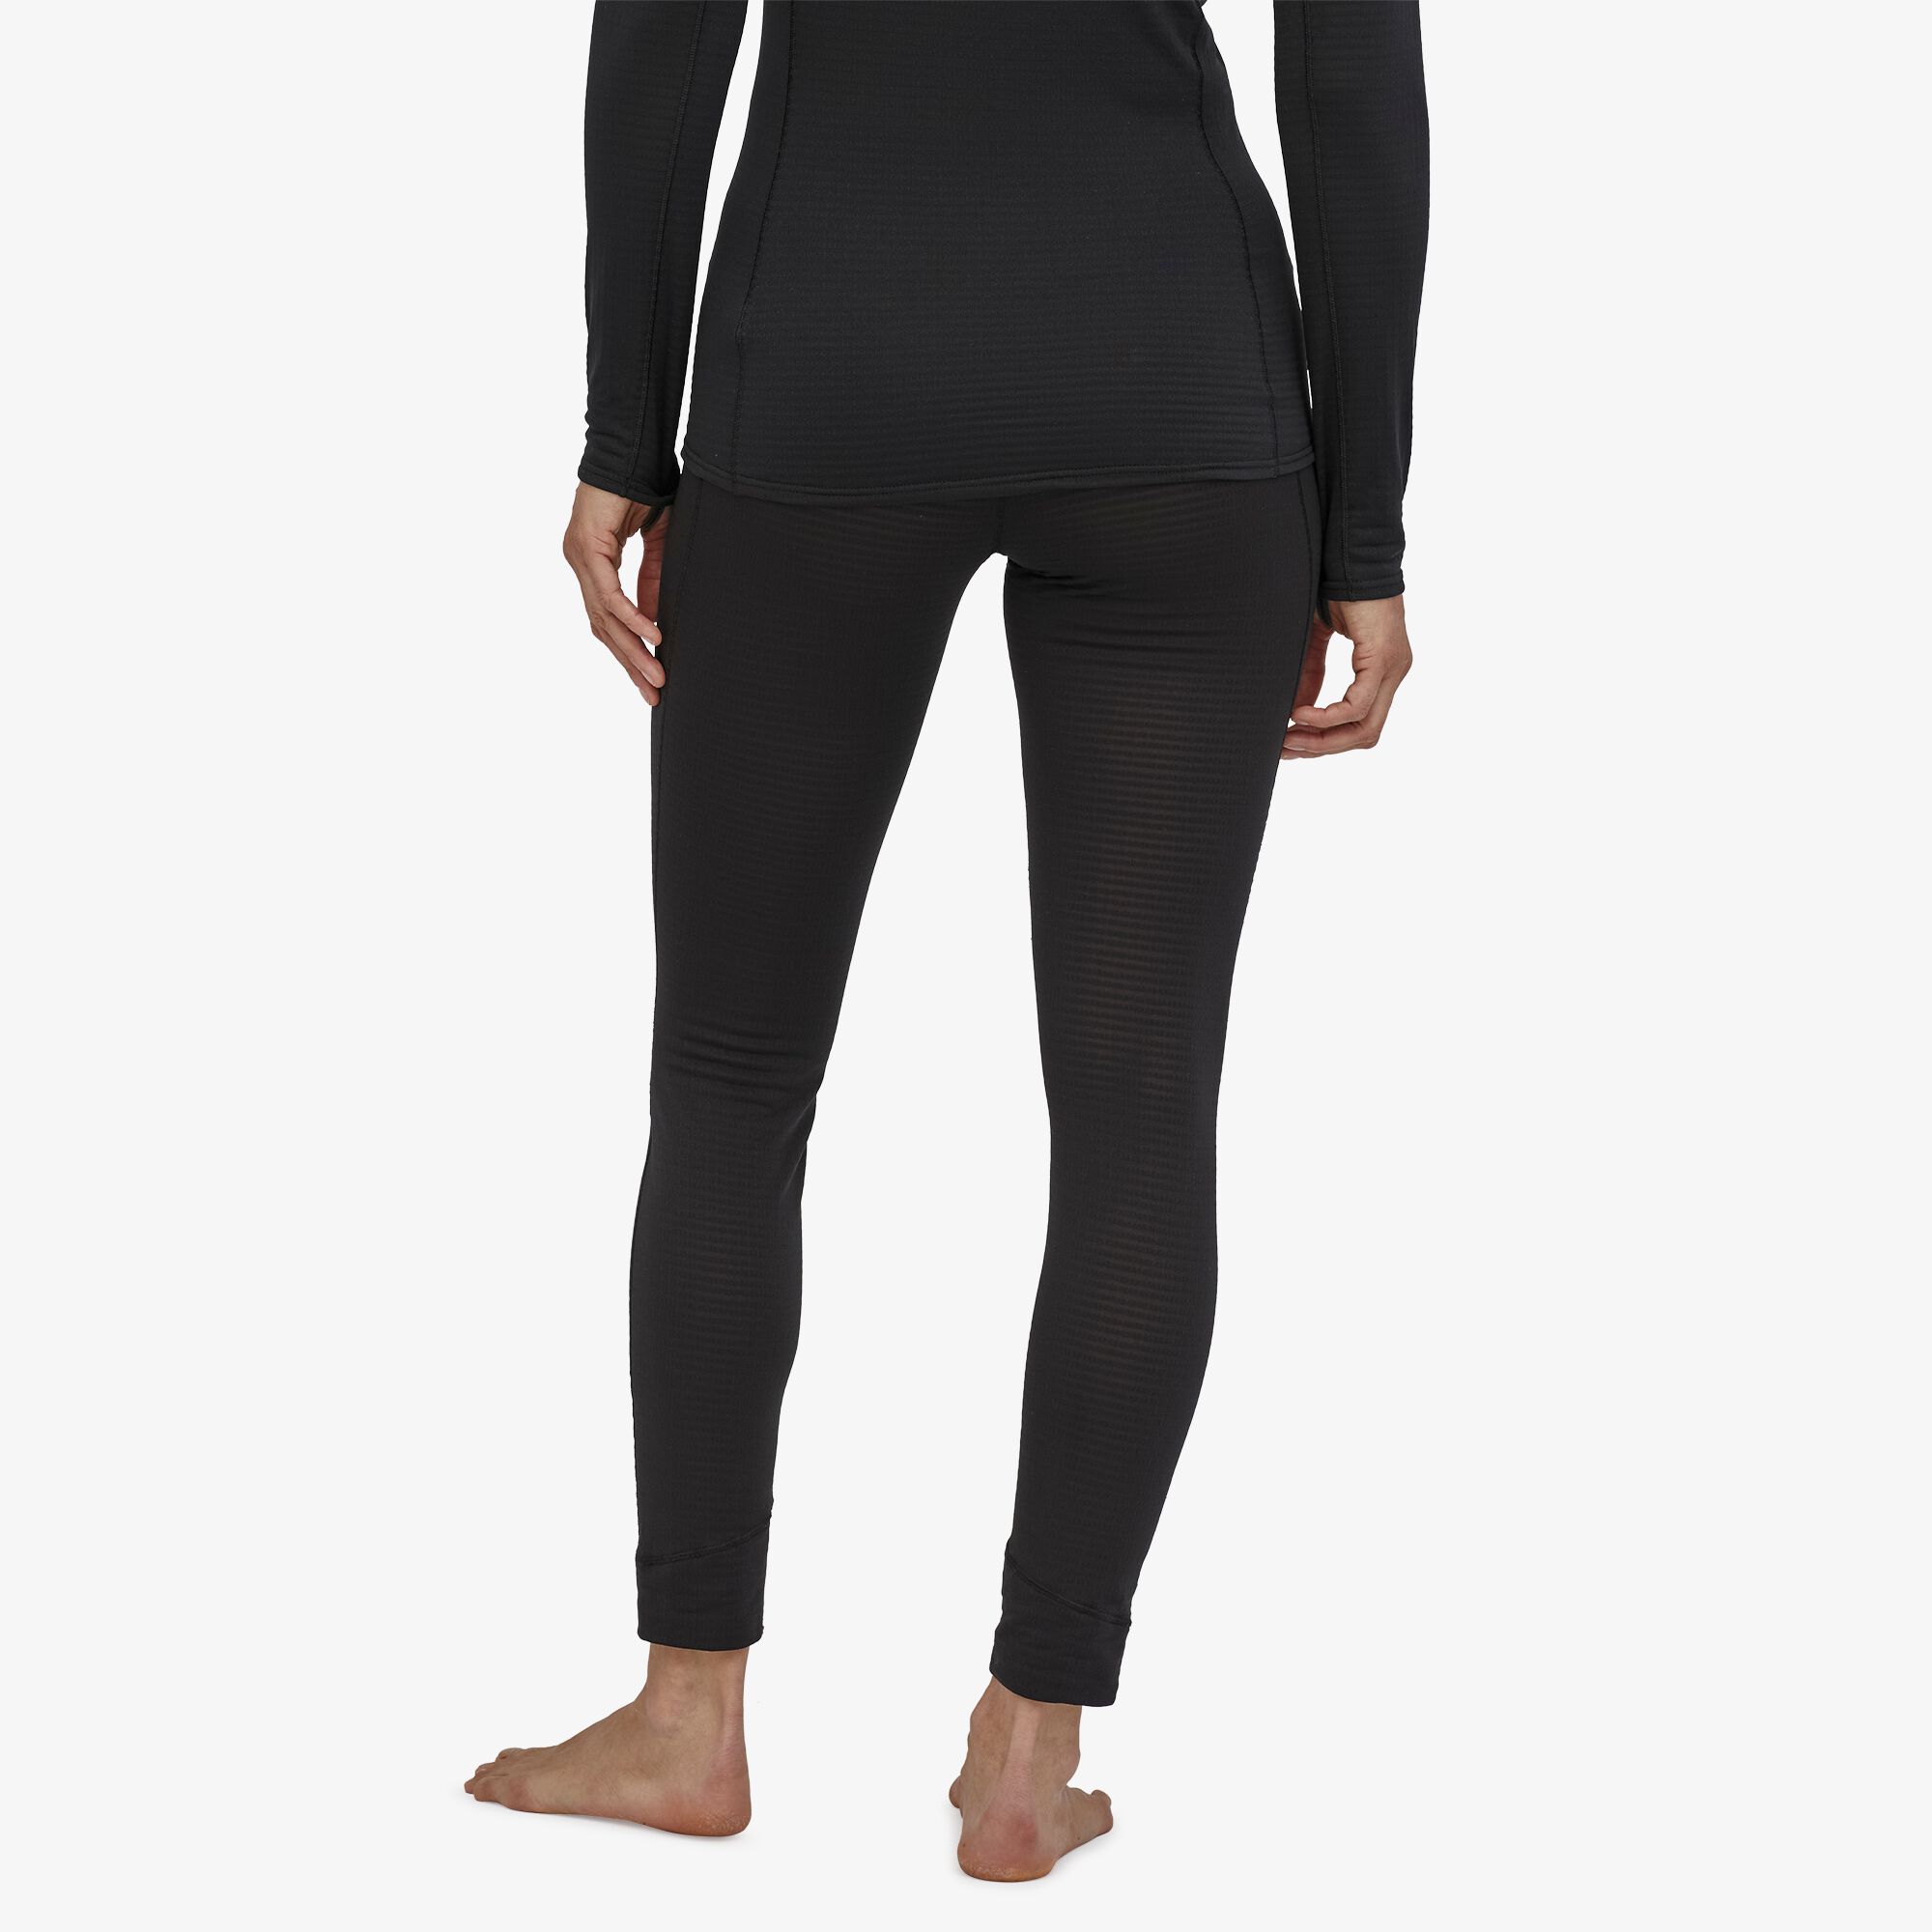 Patagonia Women's Capilene® Thermal Weight Bottoms